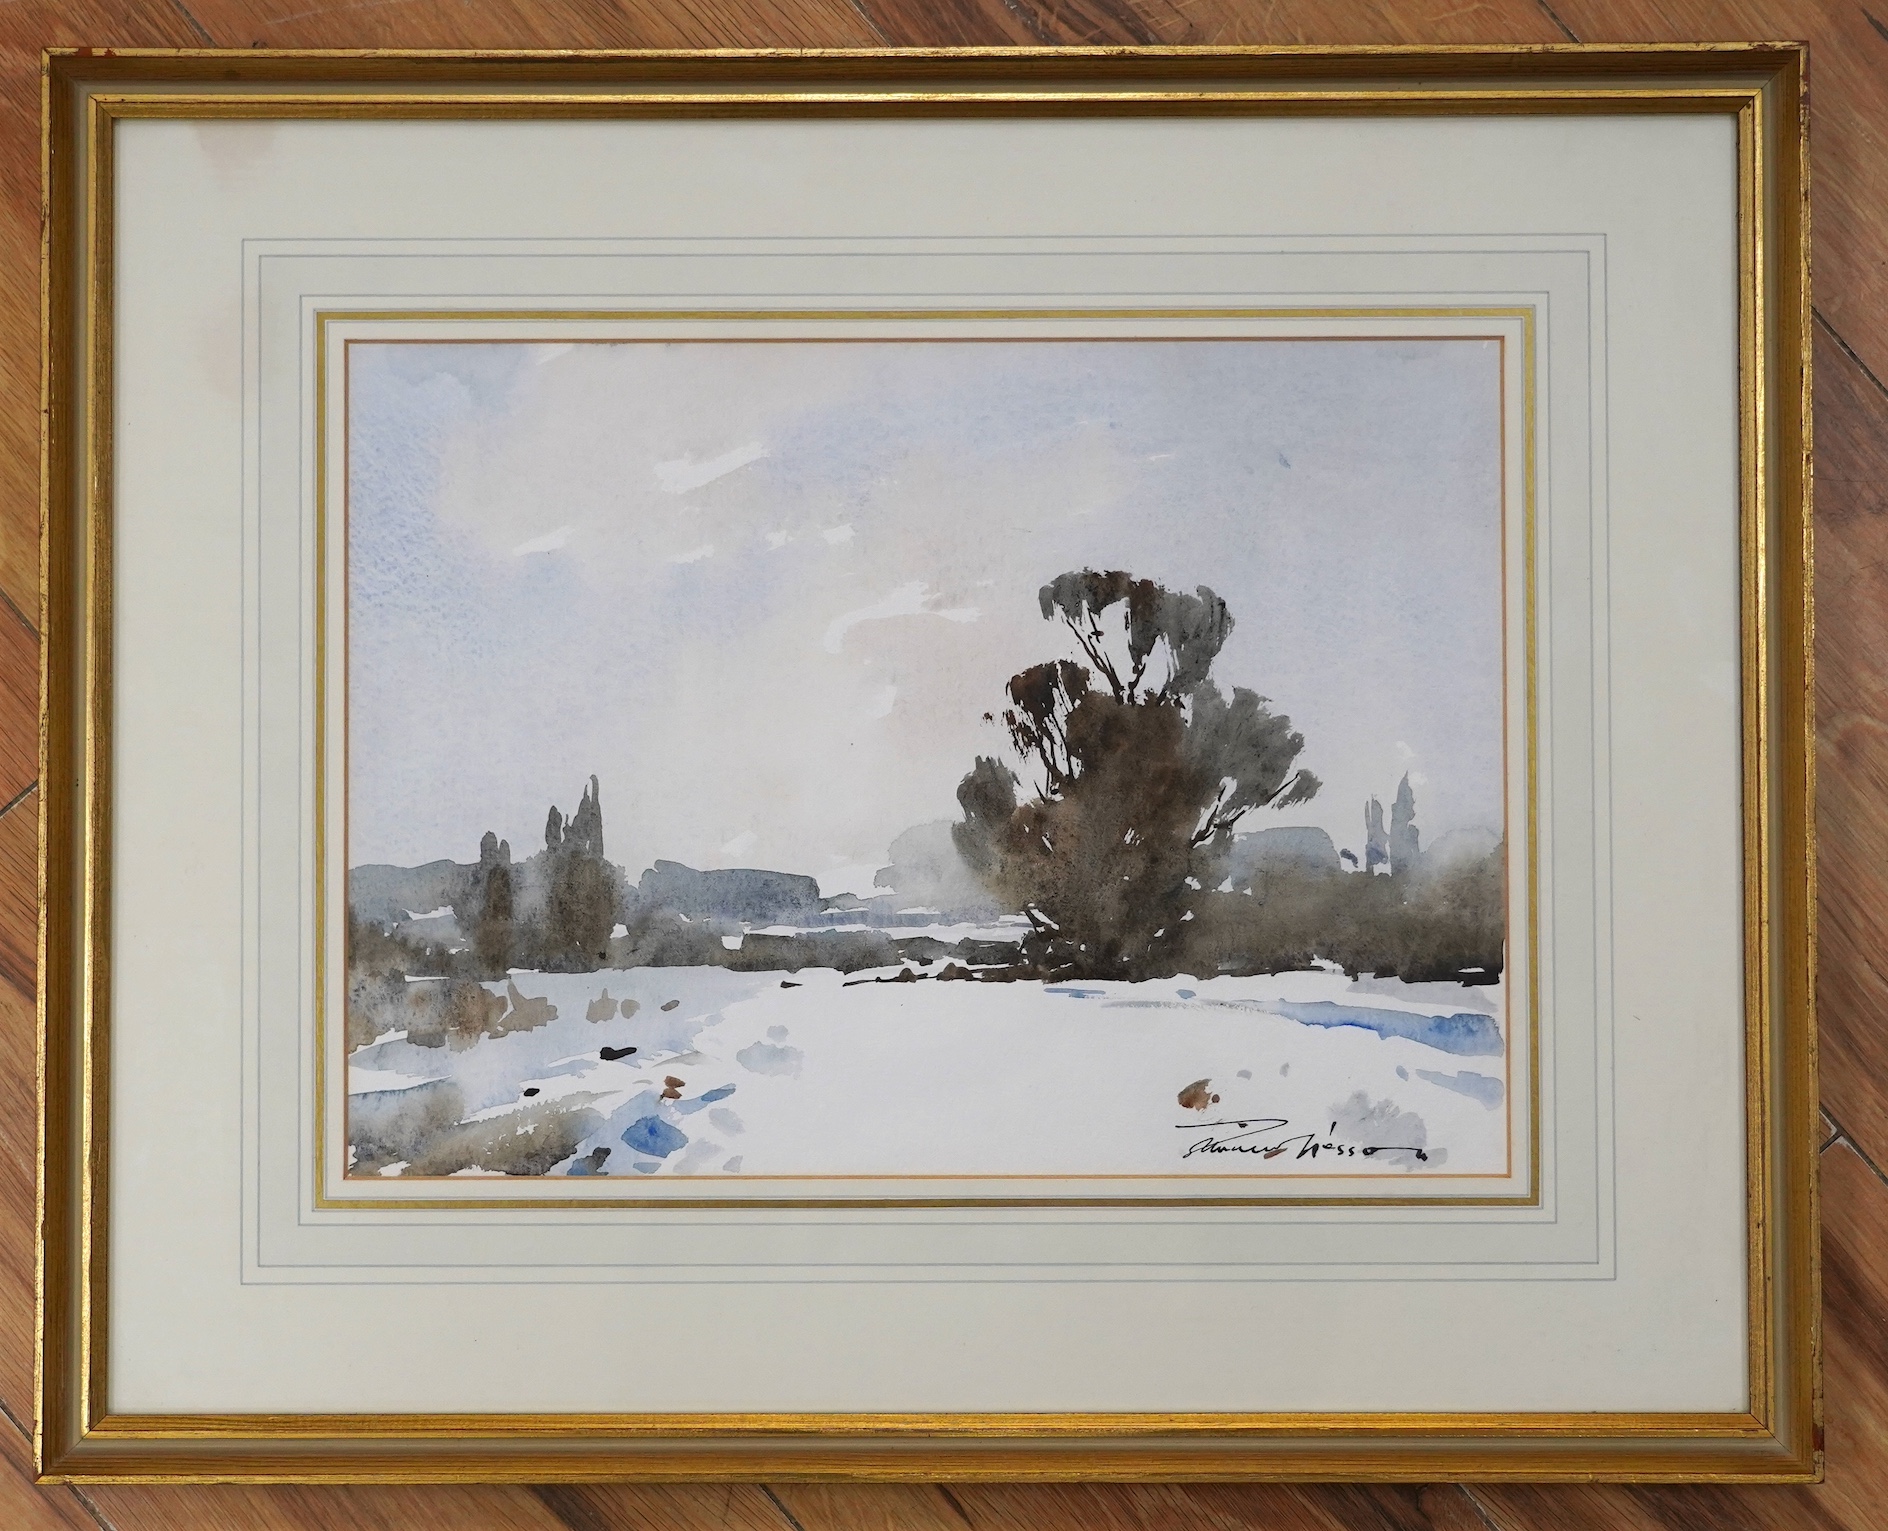 Edward Wesson (1910-1983), watercolour, 'Snow in January', signed, Fine Art label verso, 25 x 34cm